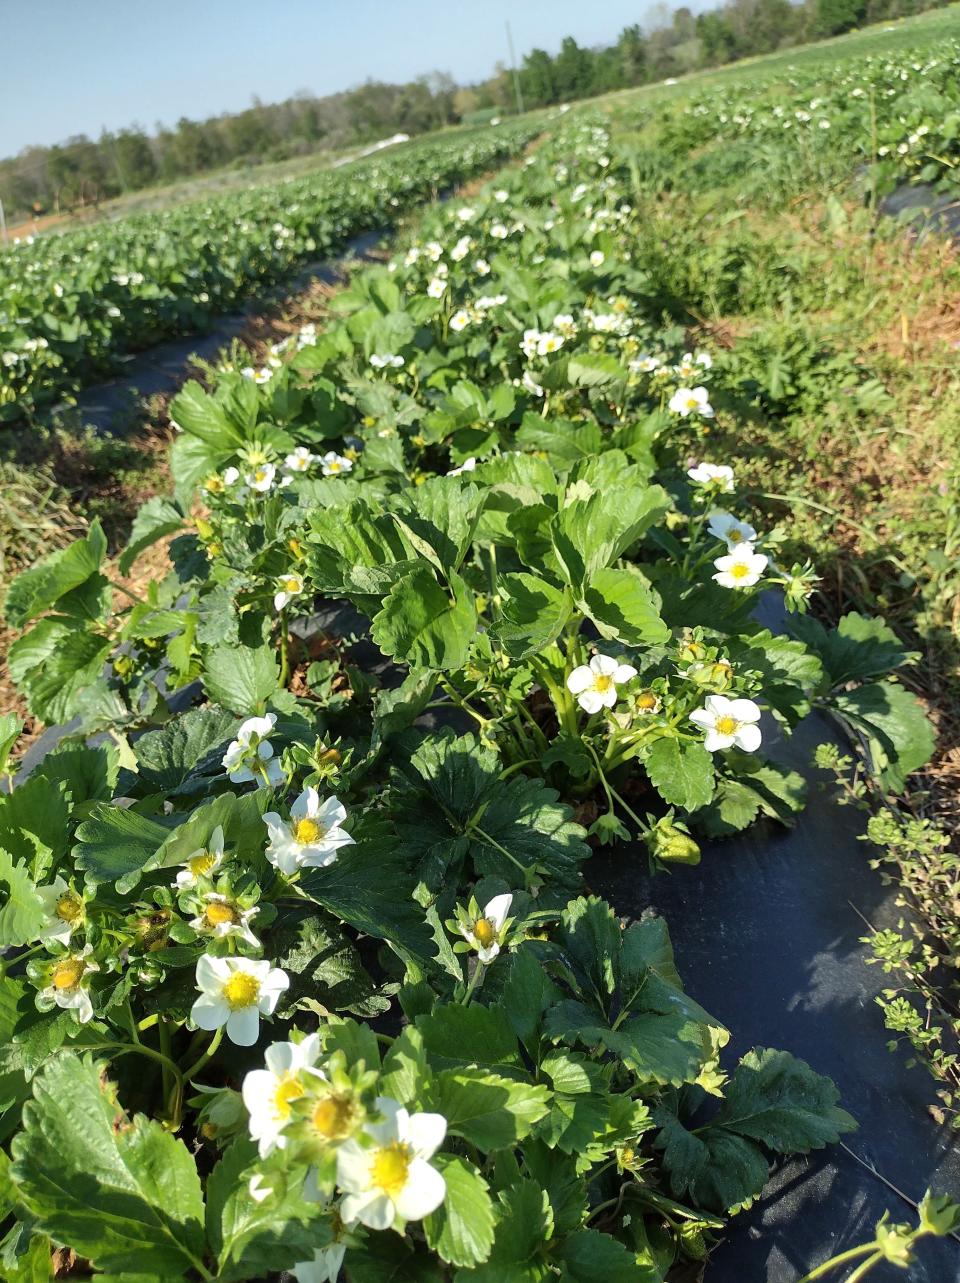 The strawberry crop at Troyer's Farm before the hail storm on April 26, 2022.